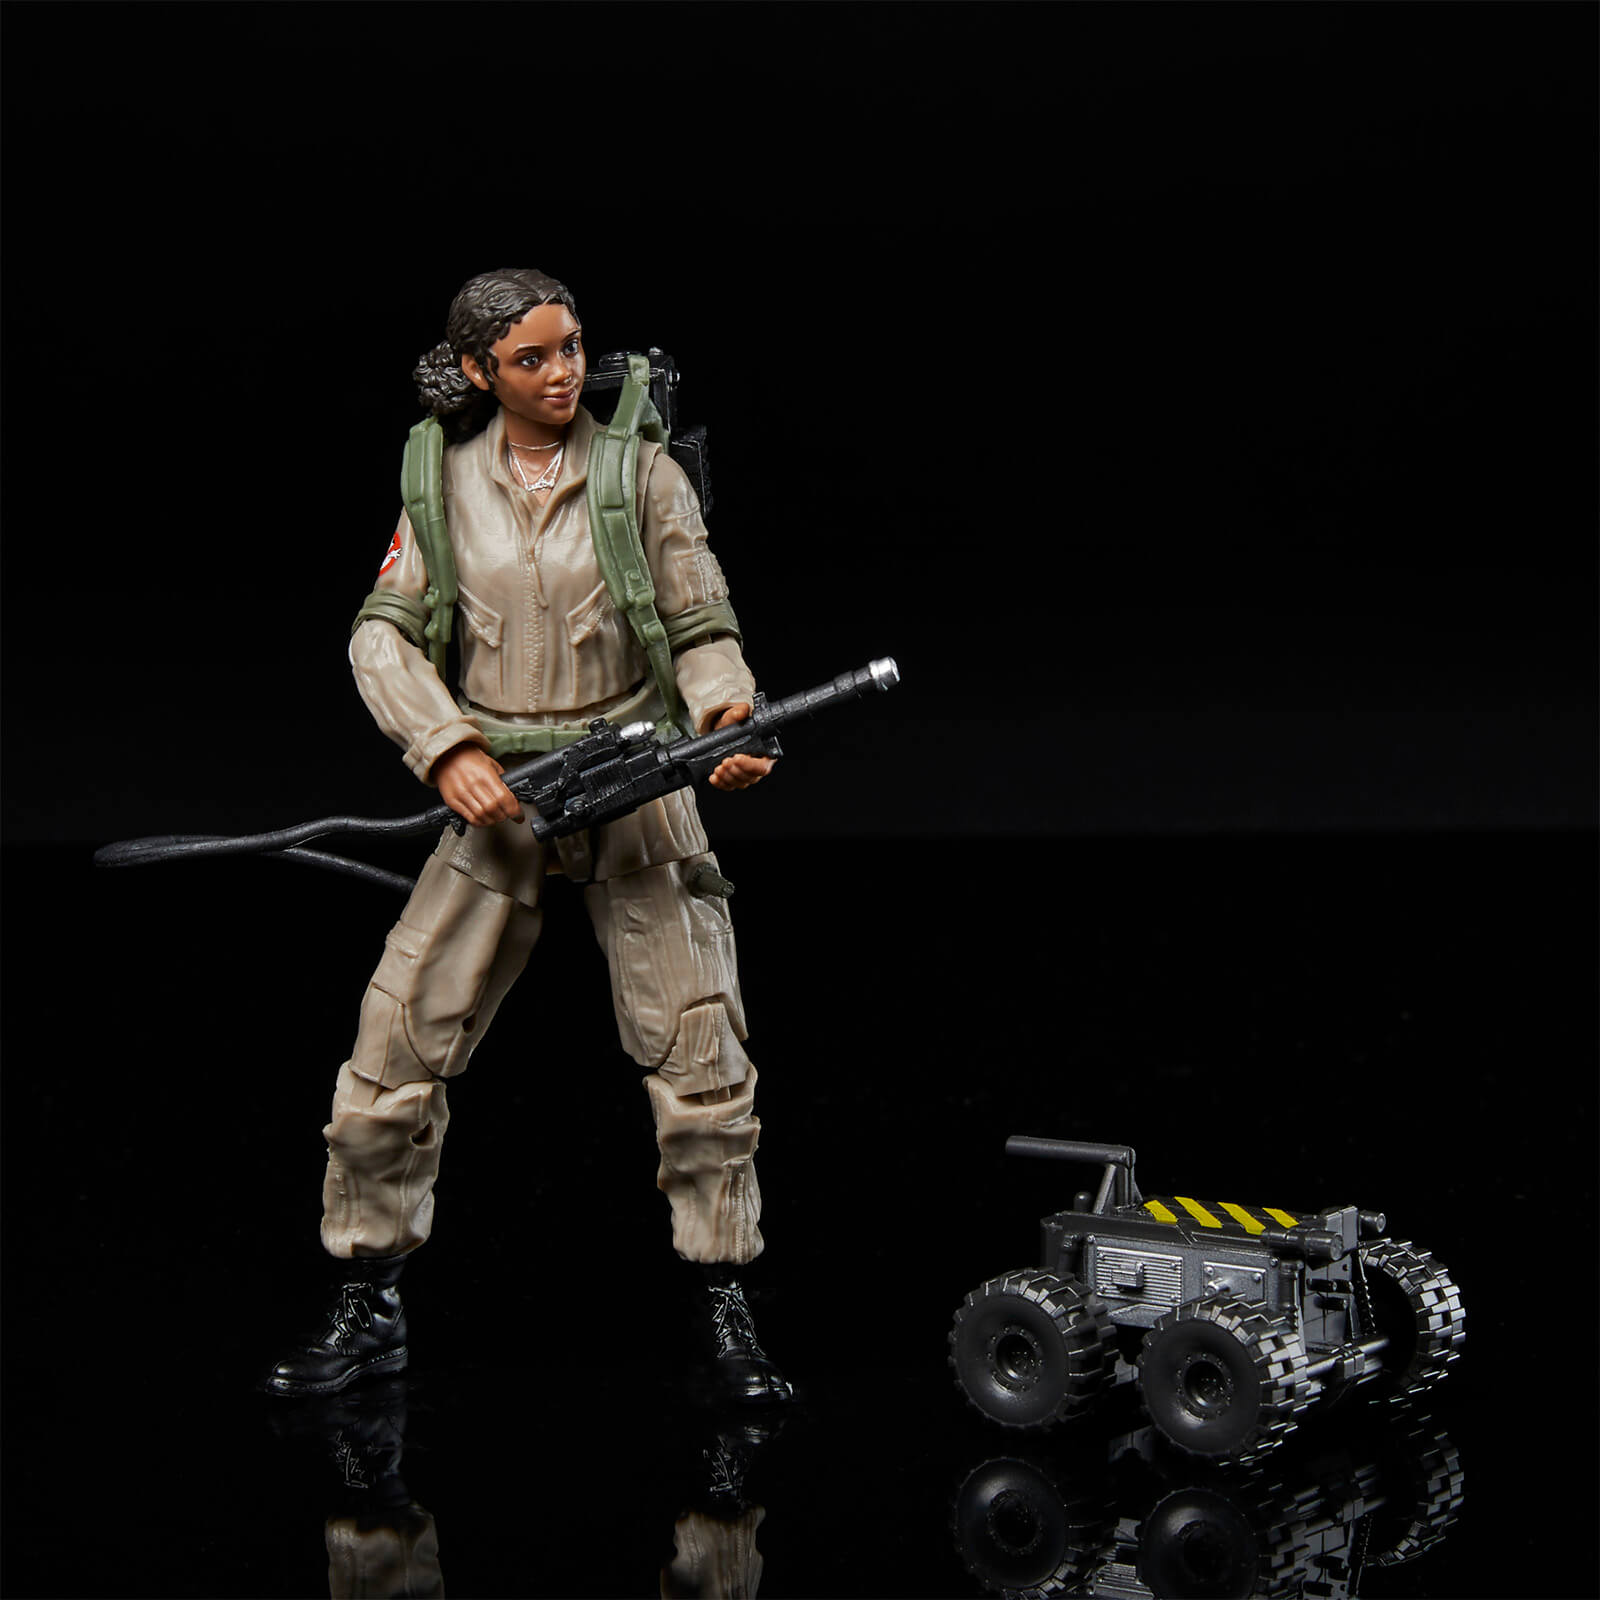 Ghostbusters Plasma Series LUCKY 15cm Toy Figure